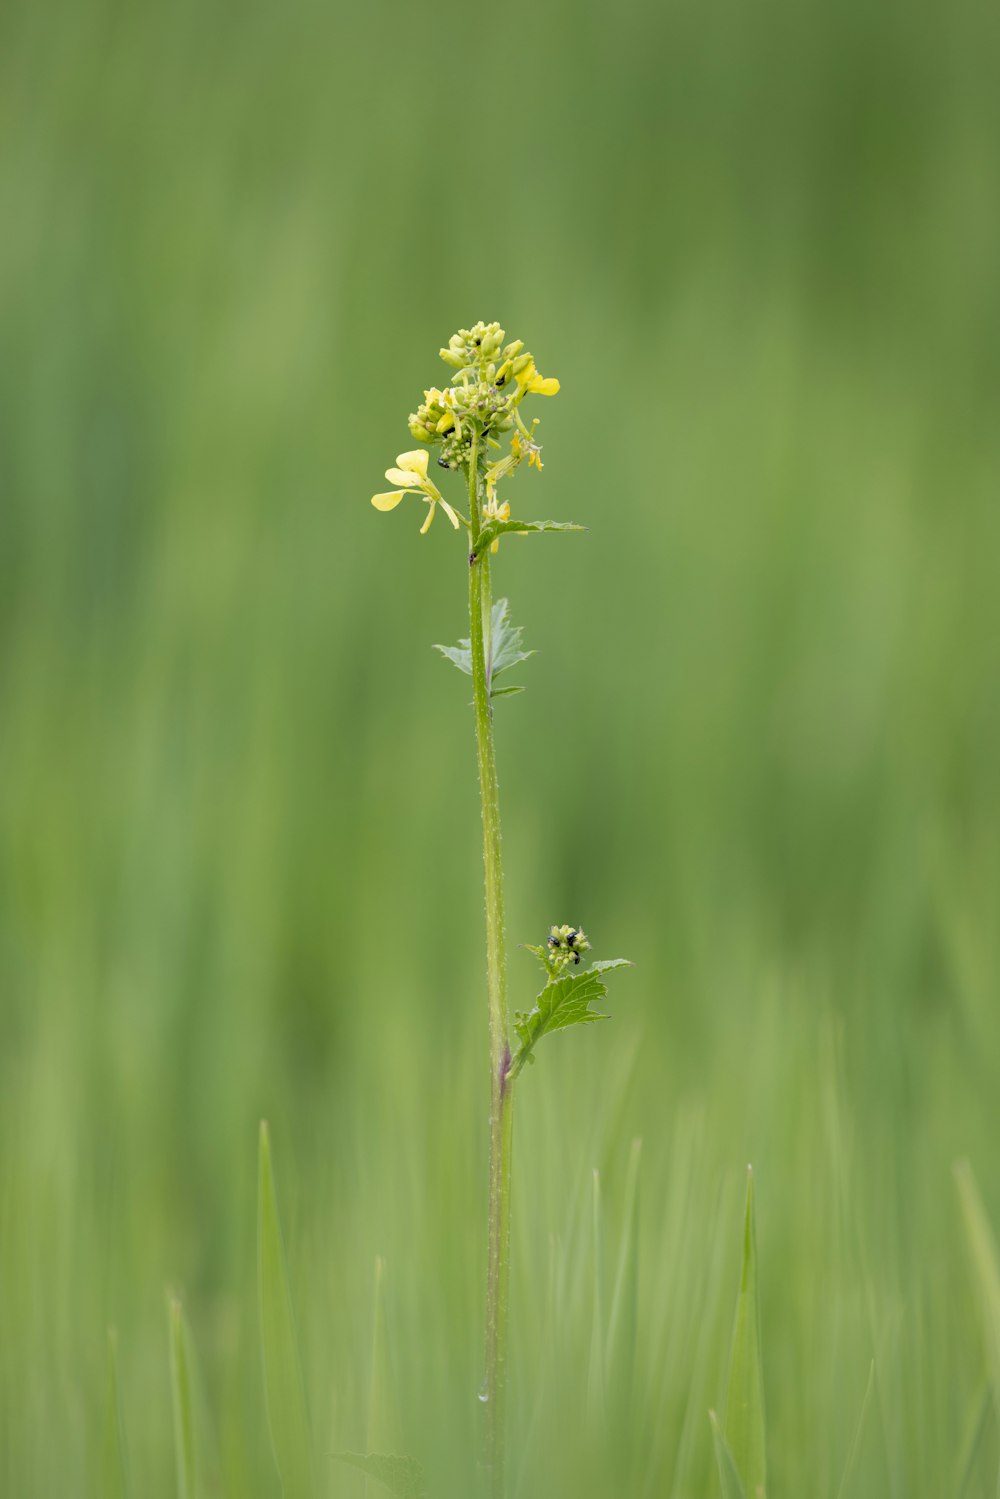 a small yellow flower in a grassy field